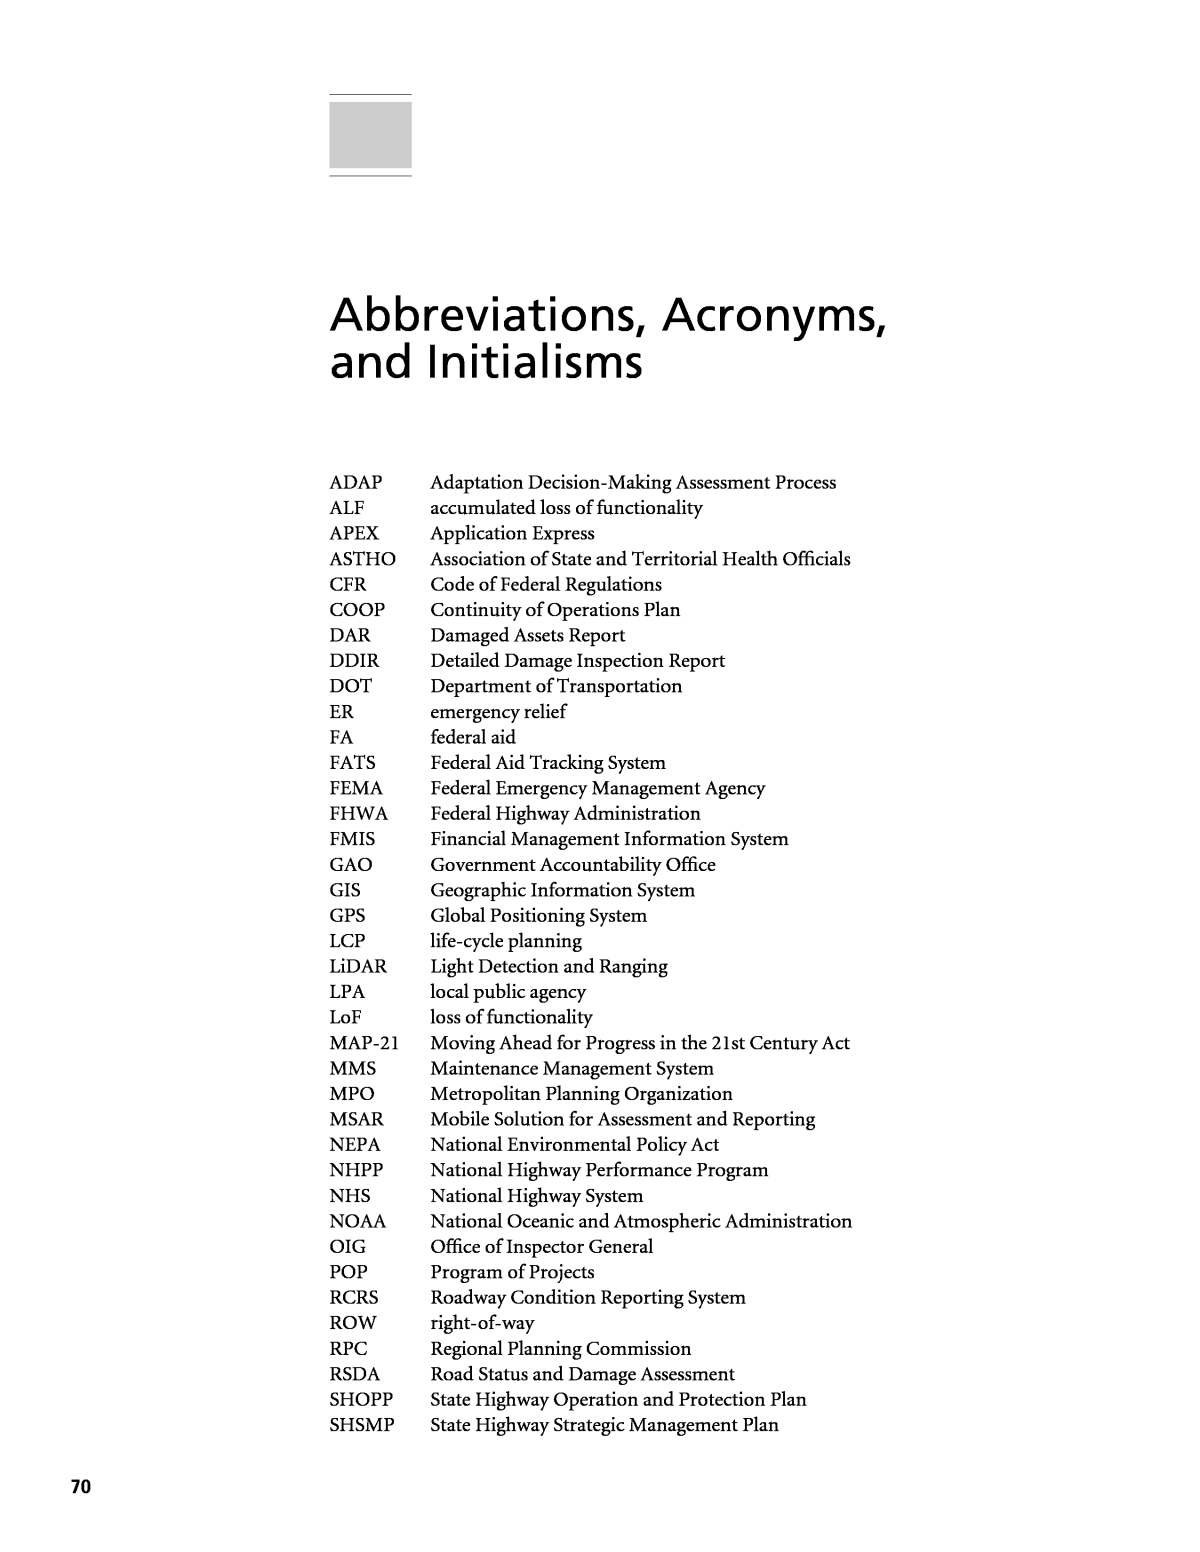 Abbreviations Acronyms And Initialisms Asset Management Approaches To Identifying And Evaluating Assets Damaged Due To Emergency Events The National Academies Press